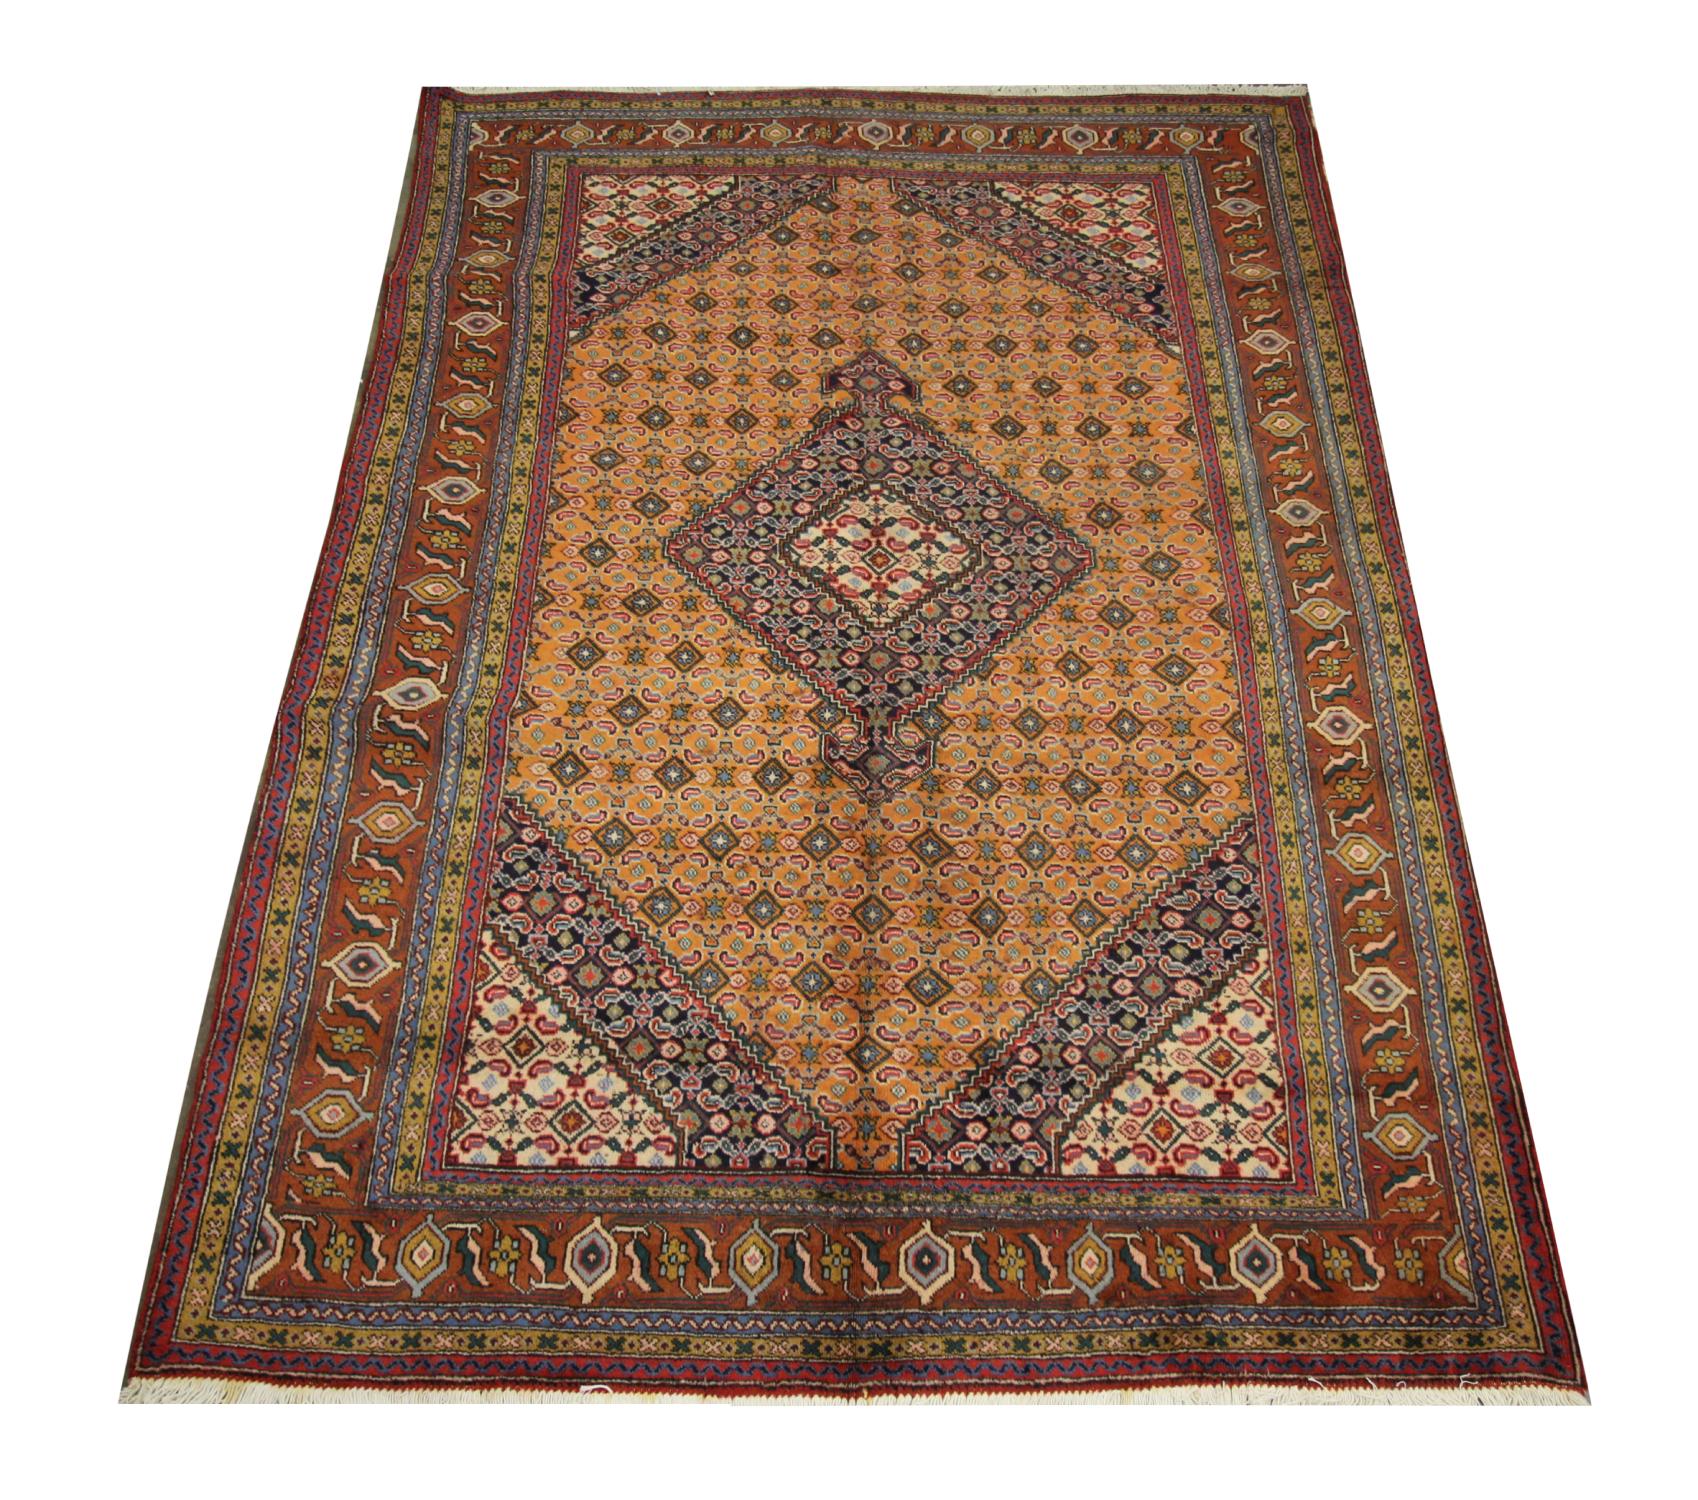 This vintage wool rug is a fine Turkish carpet woven with a symmetrical motif design. Featuring a rust gold background and accents of blue, cream, brown and red that make up the intricate medallions and geometric patterns. The distinctive character